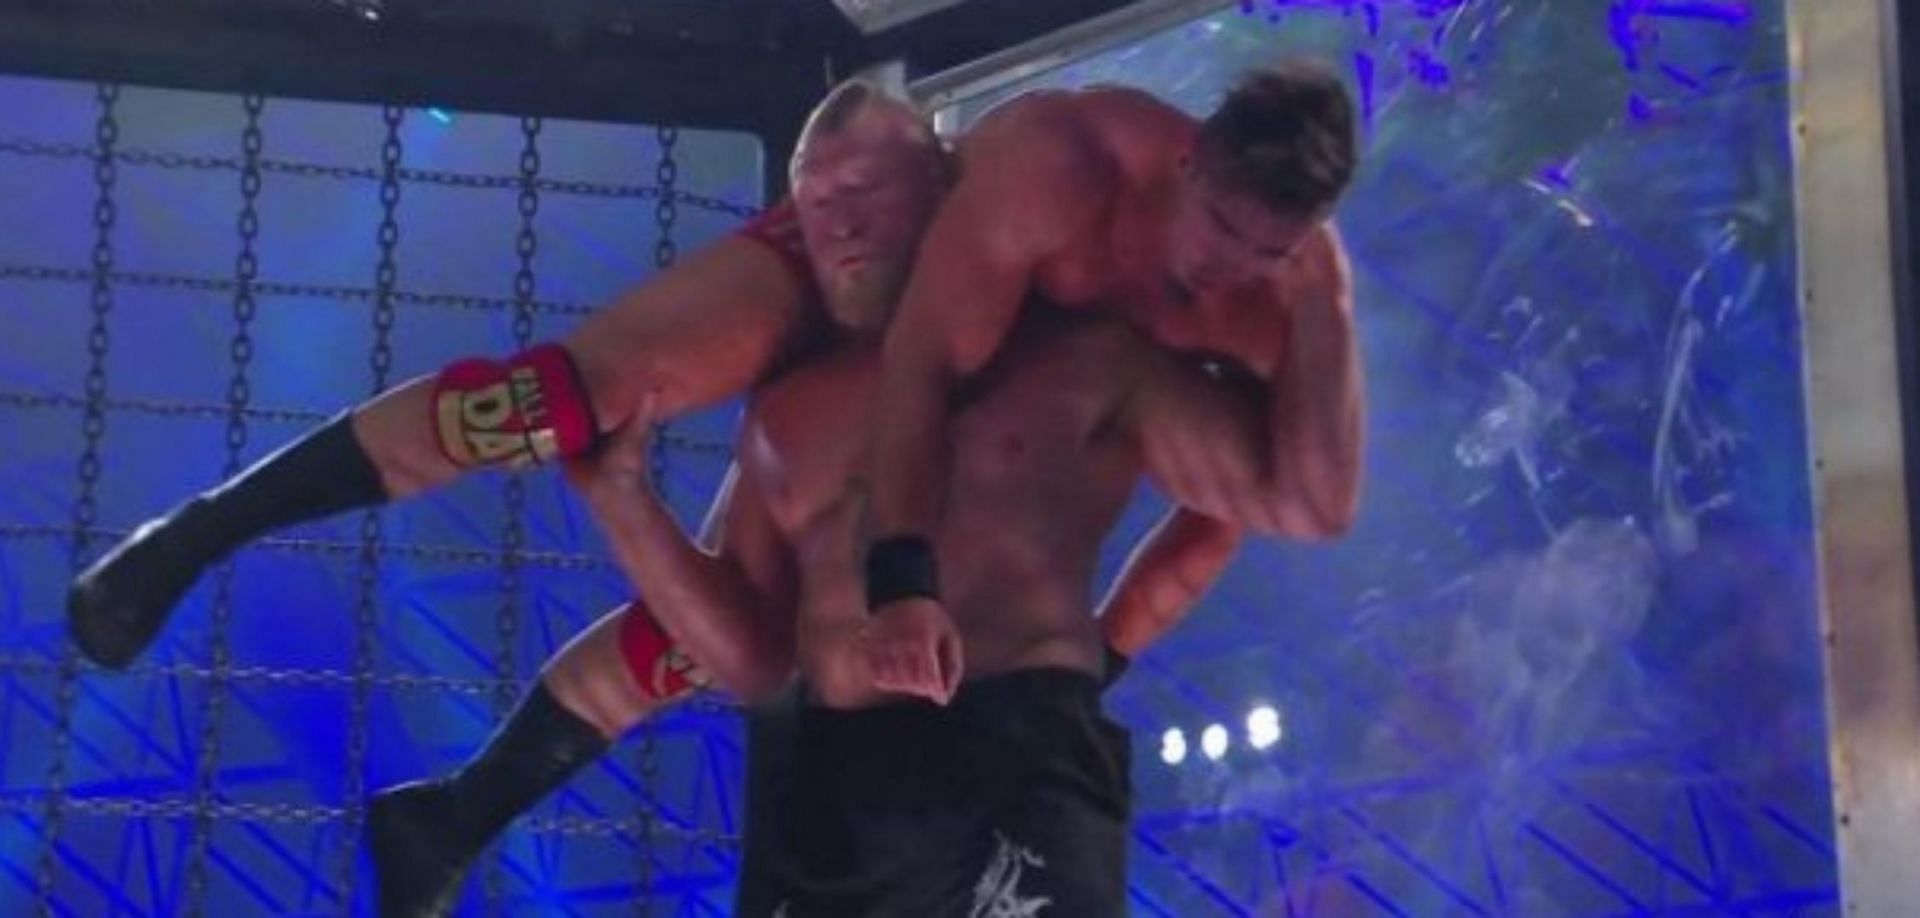 Austin Theory was on the end of a massive F5 from Brock Lesnar.